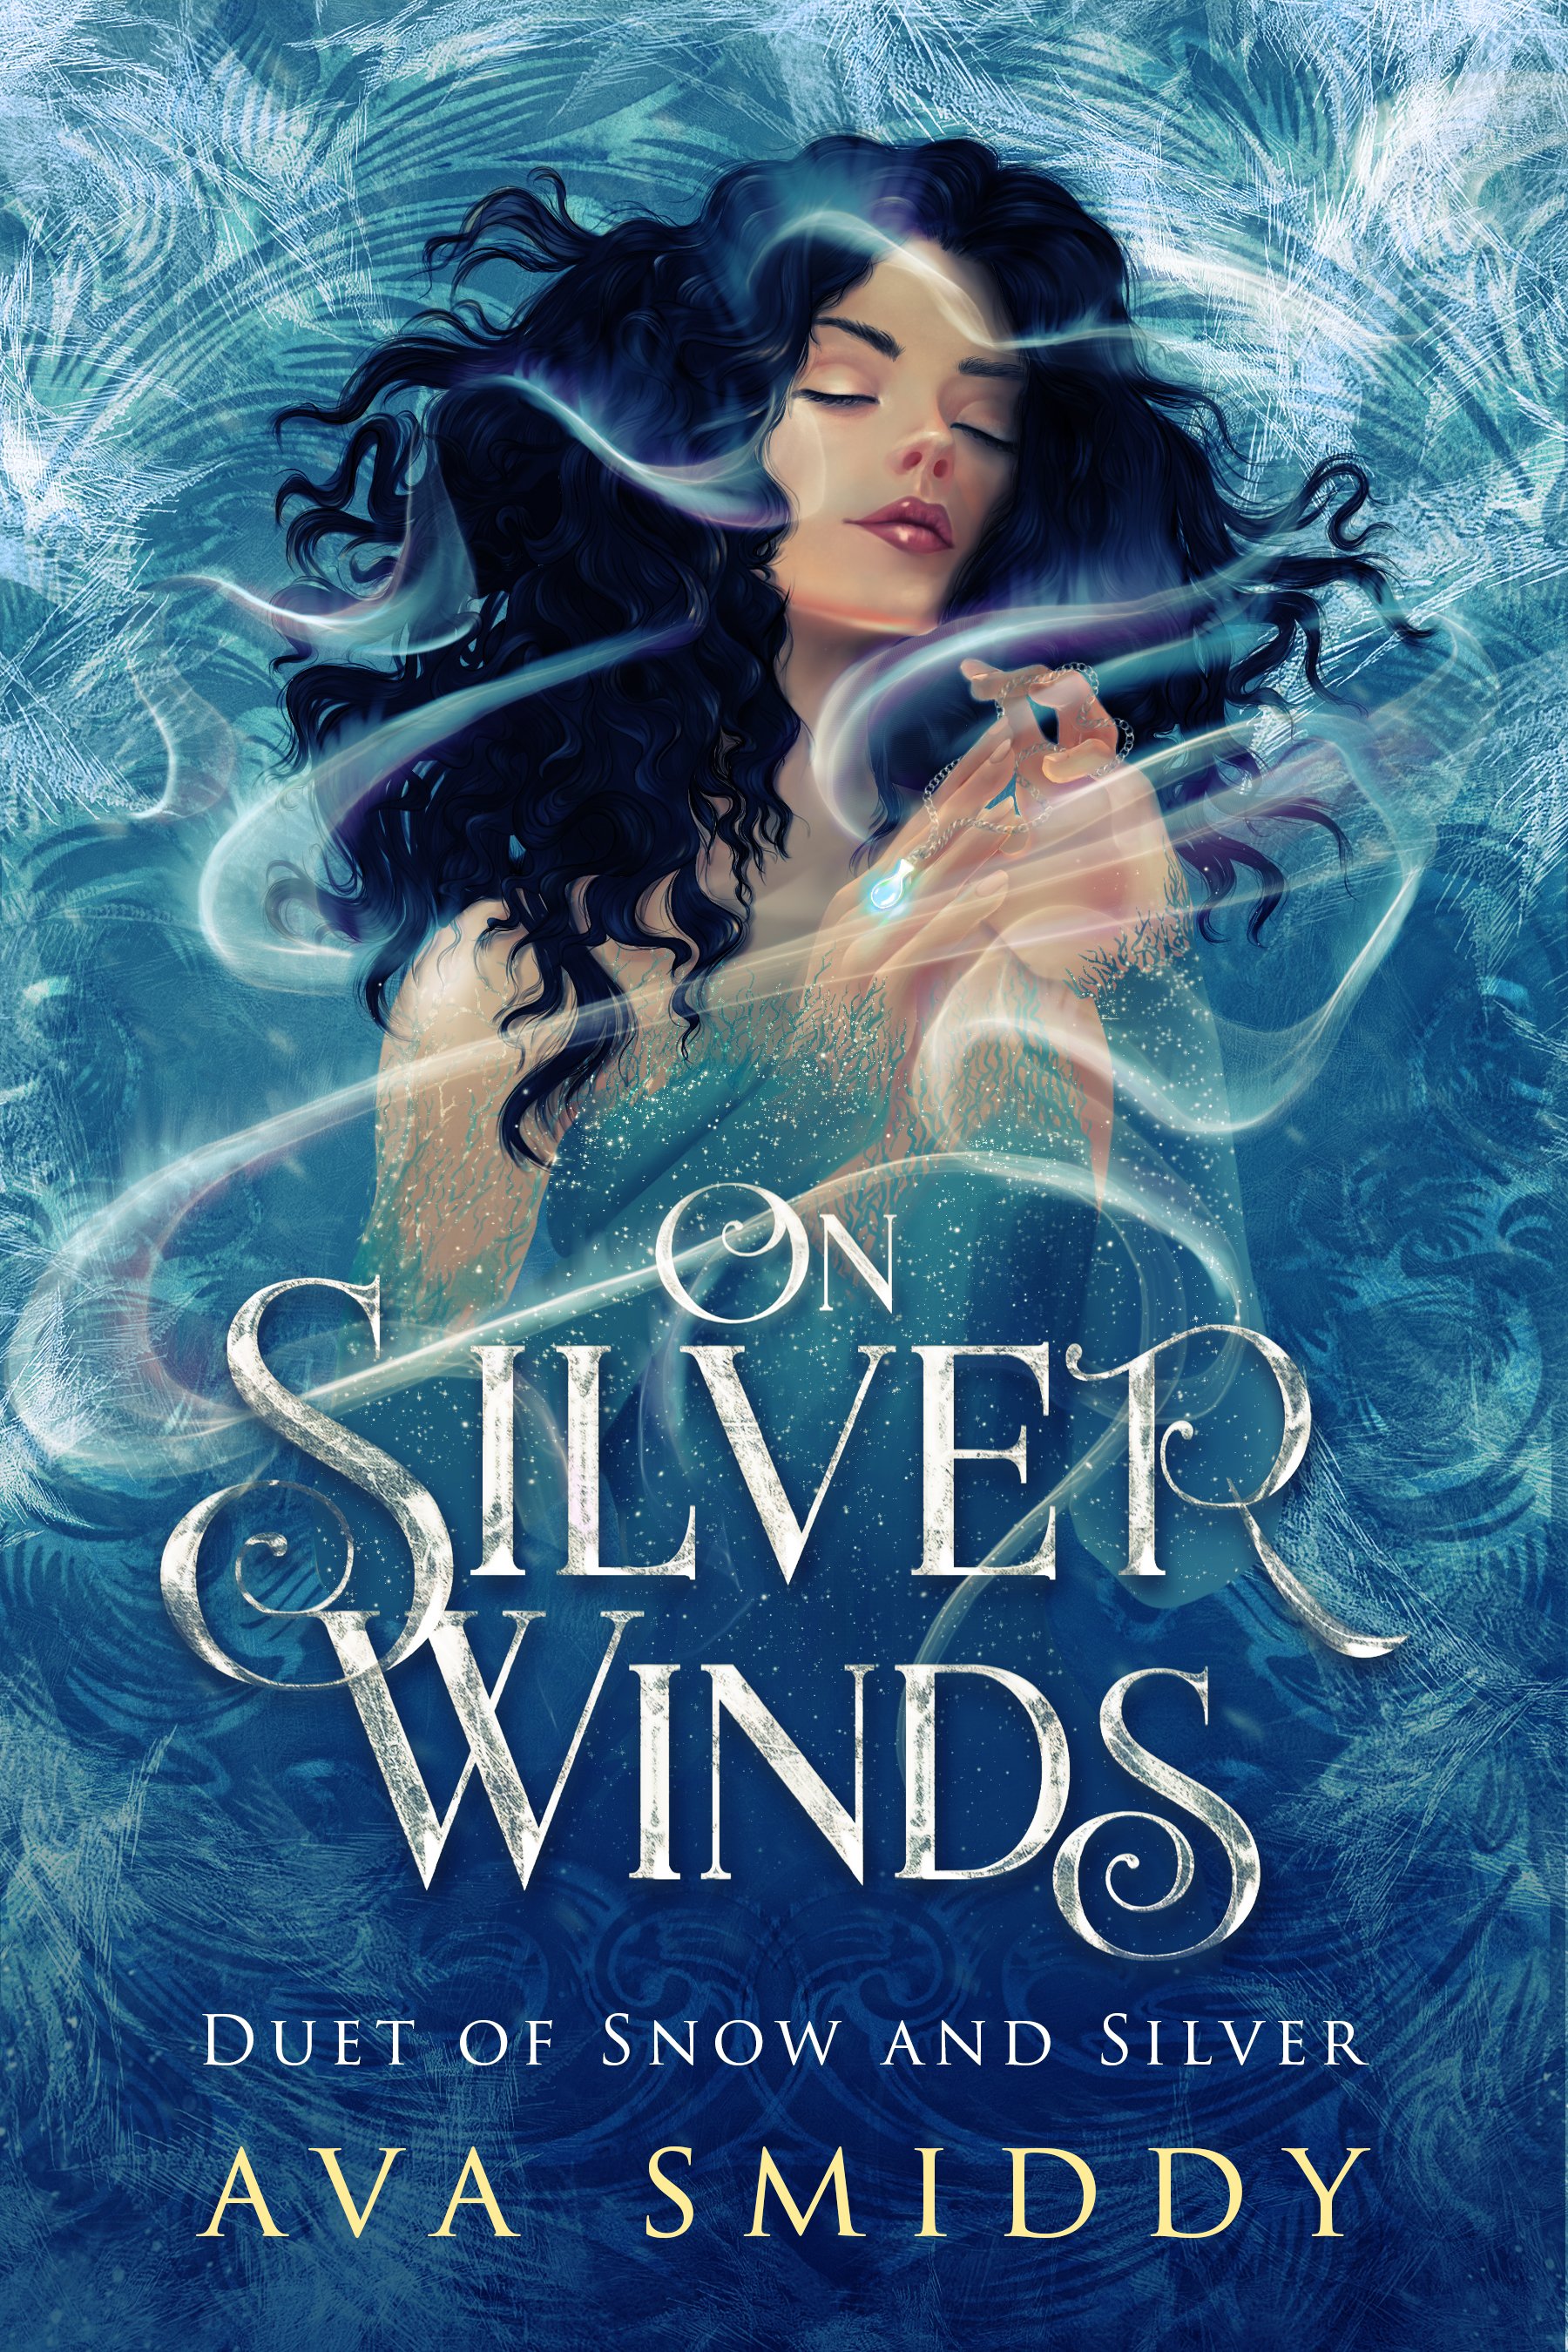 On_Silver_Winds-ebook cover.jpg